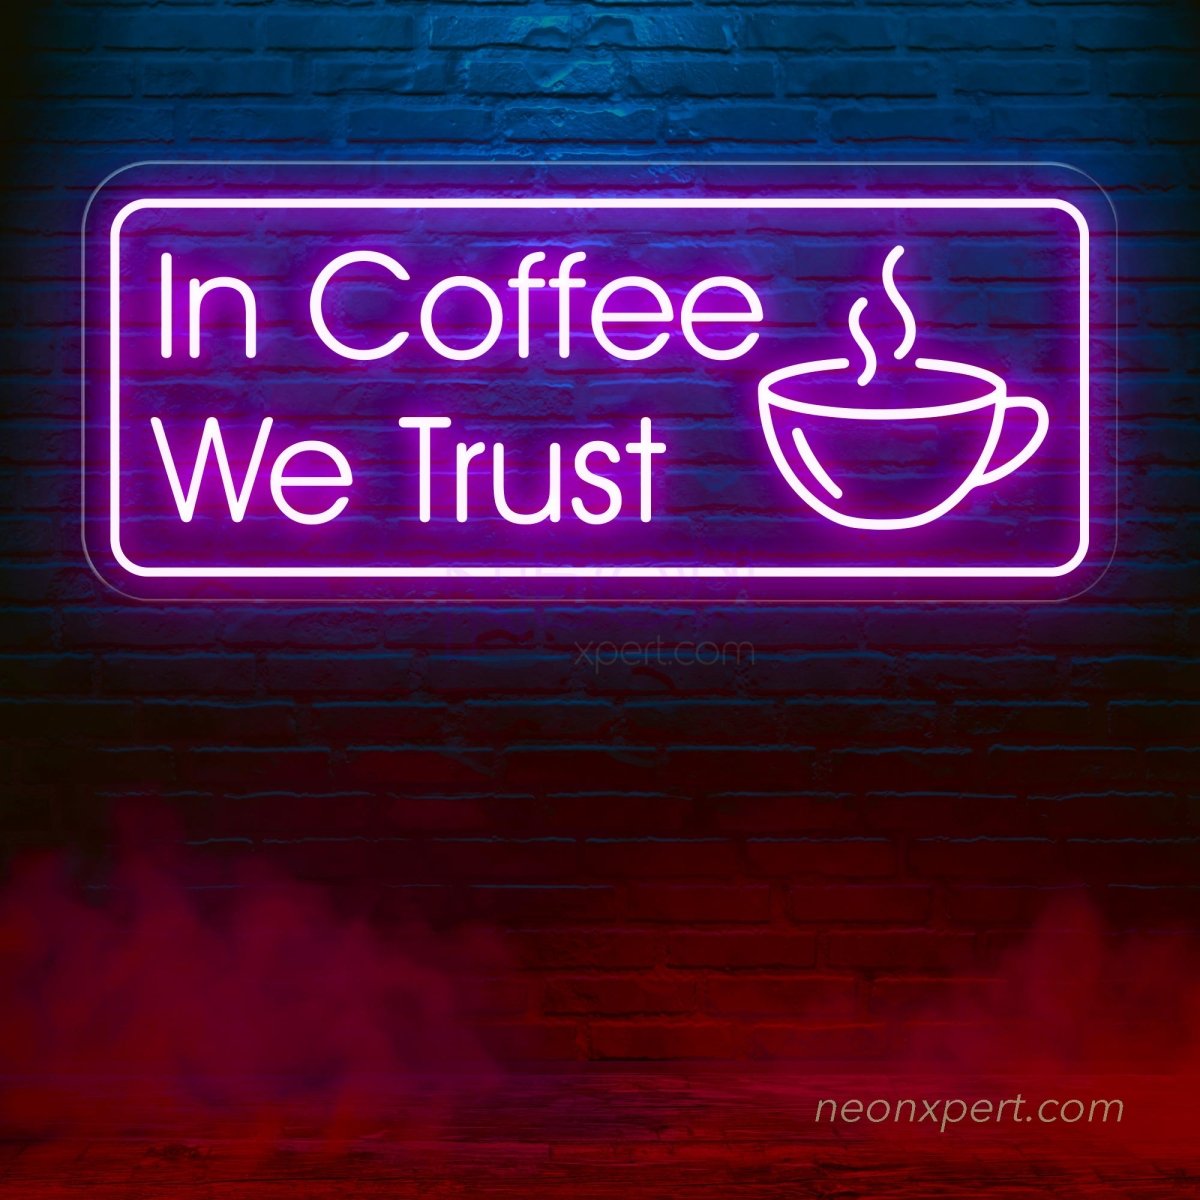 In Coffee We Trust | Coffee Led Neon Light - NeonXpert